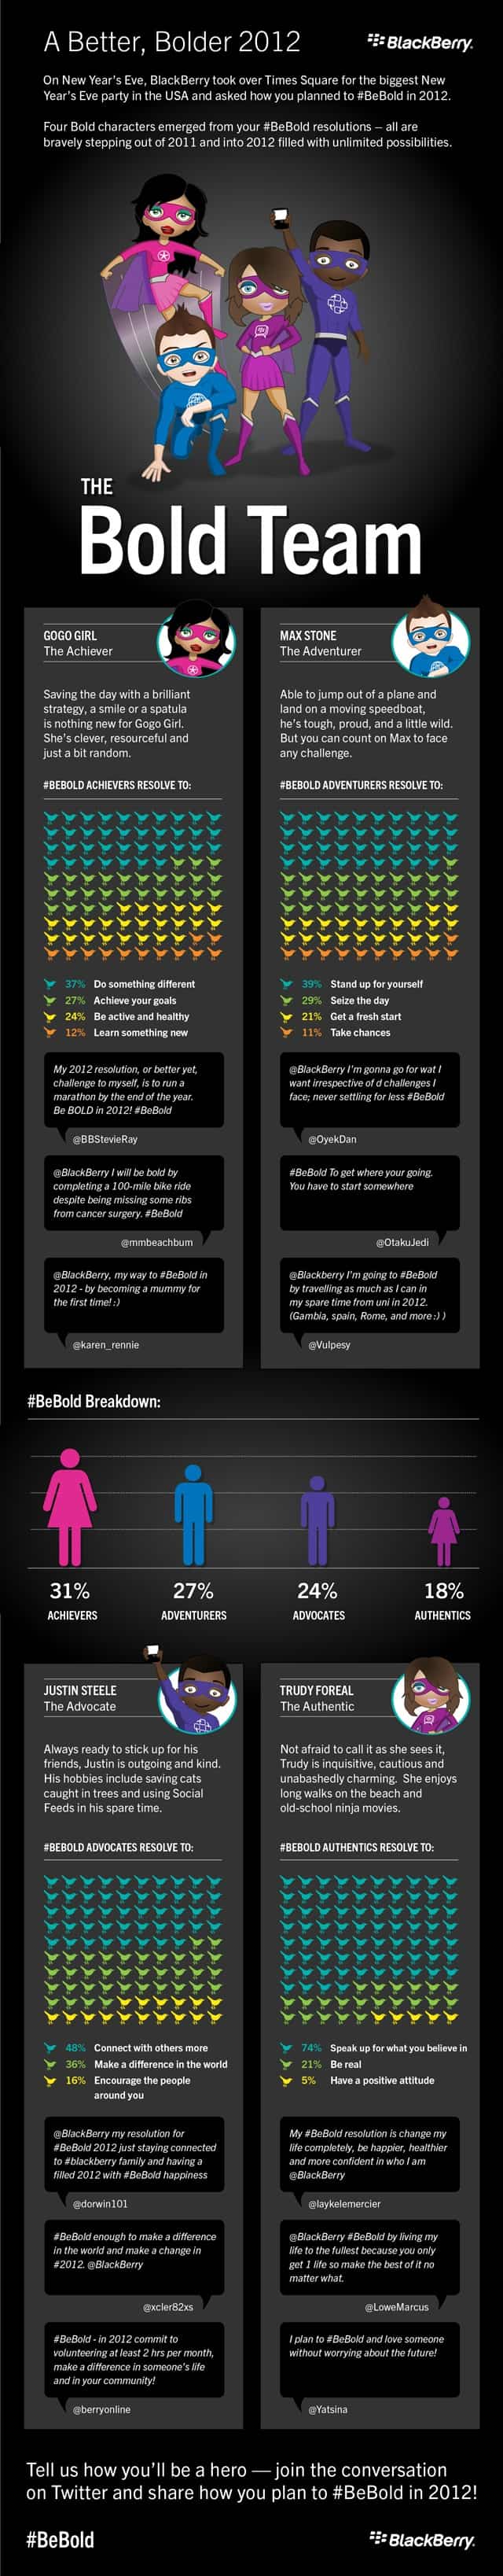 be-bold-infographic